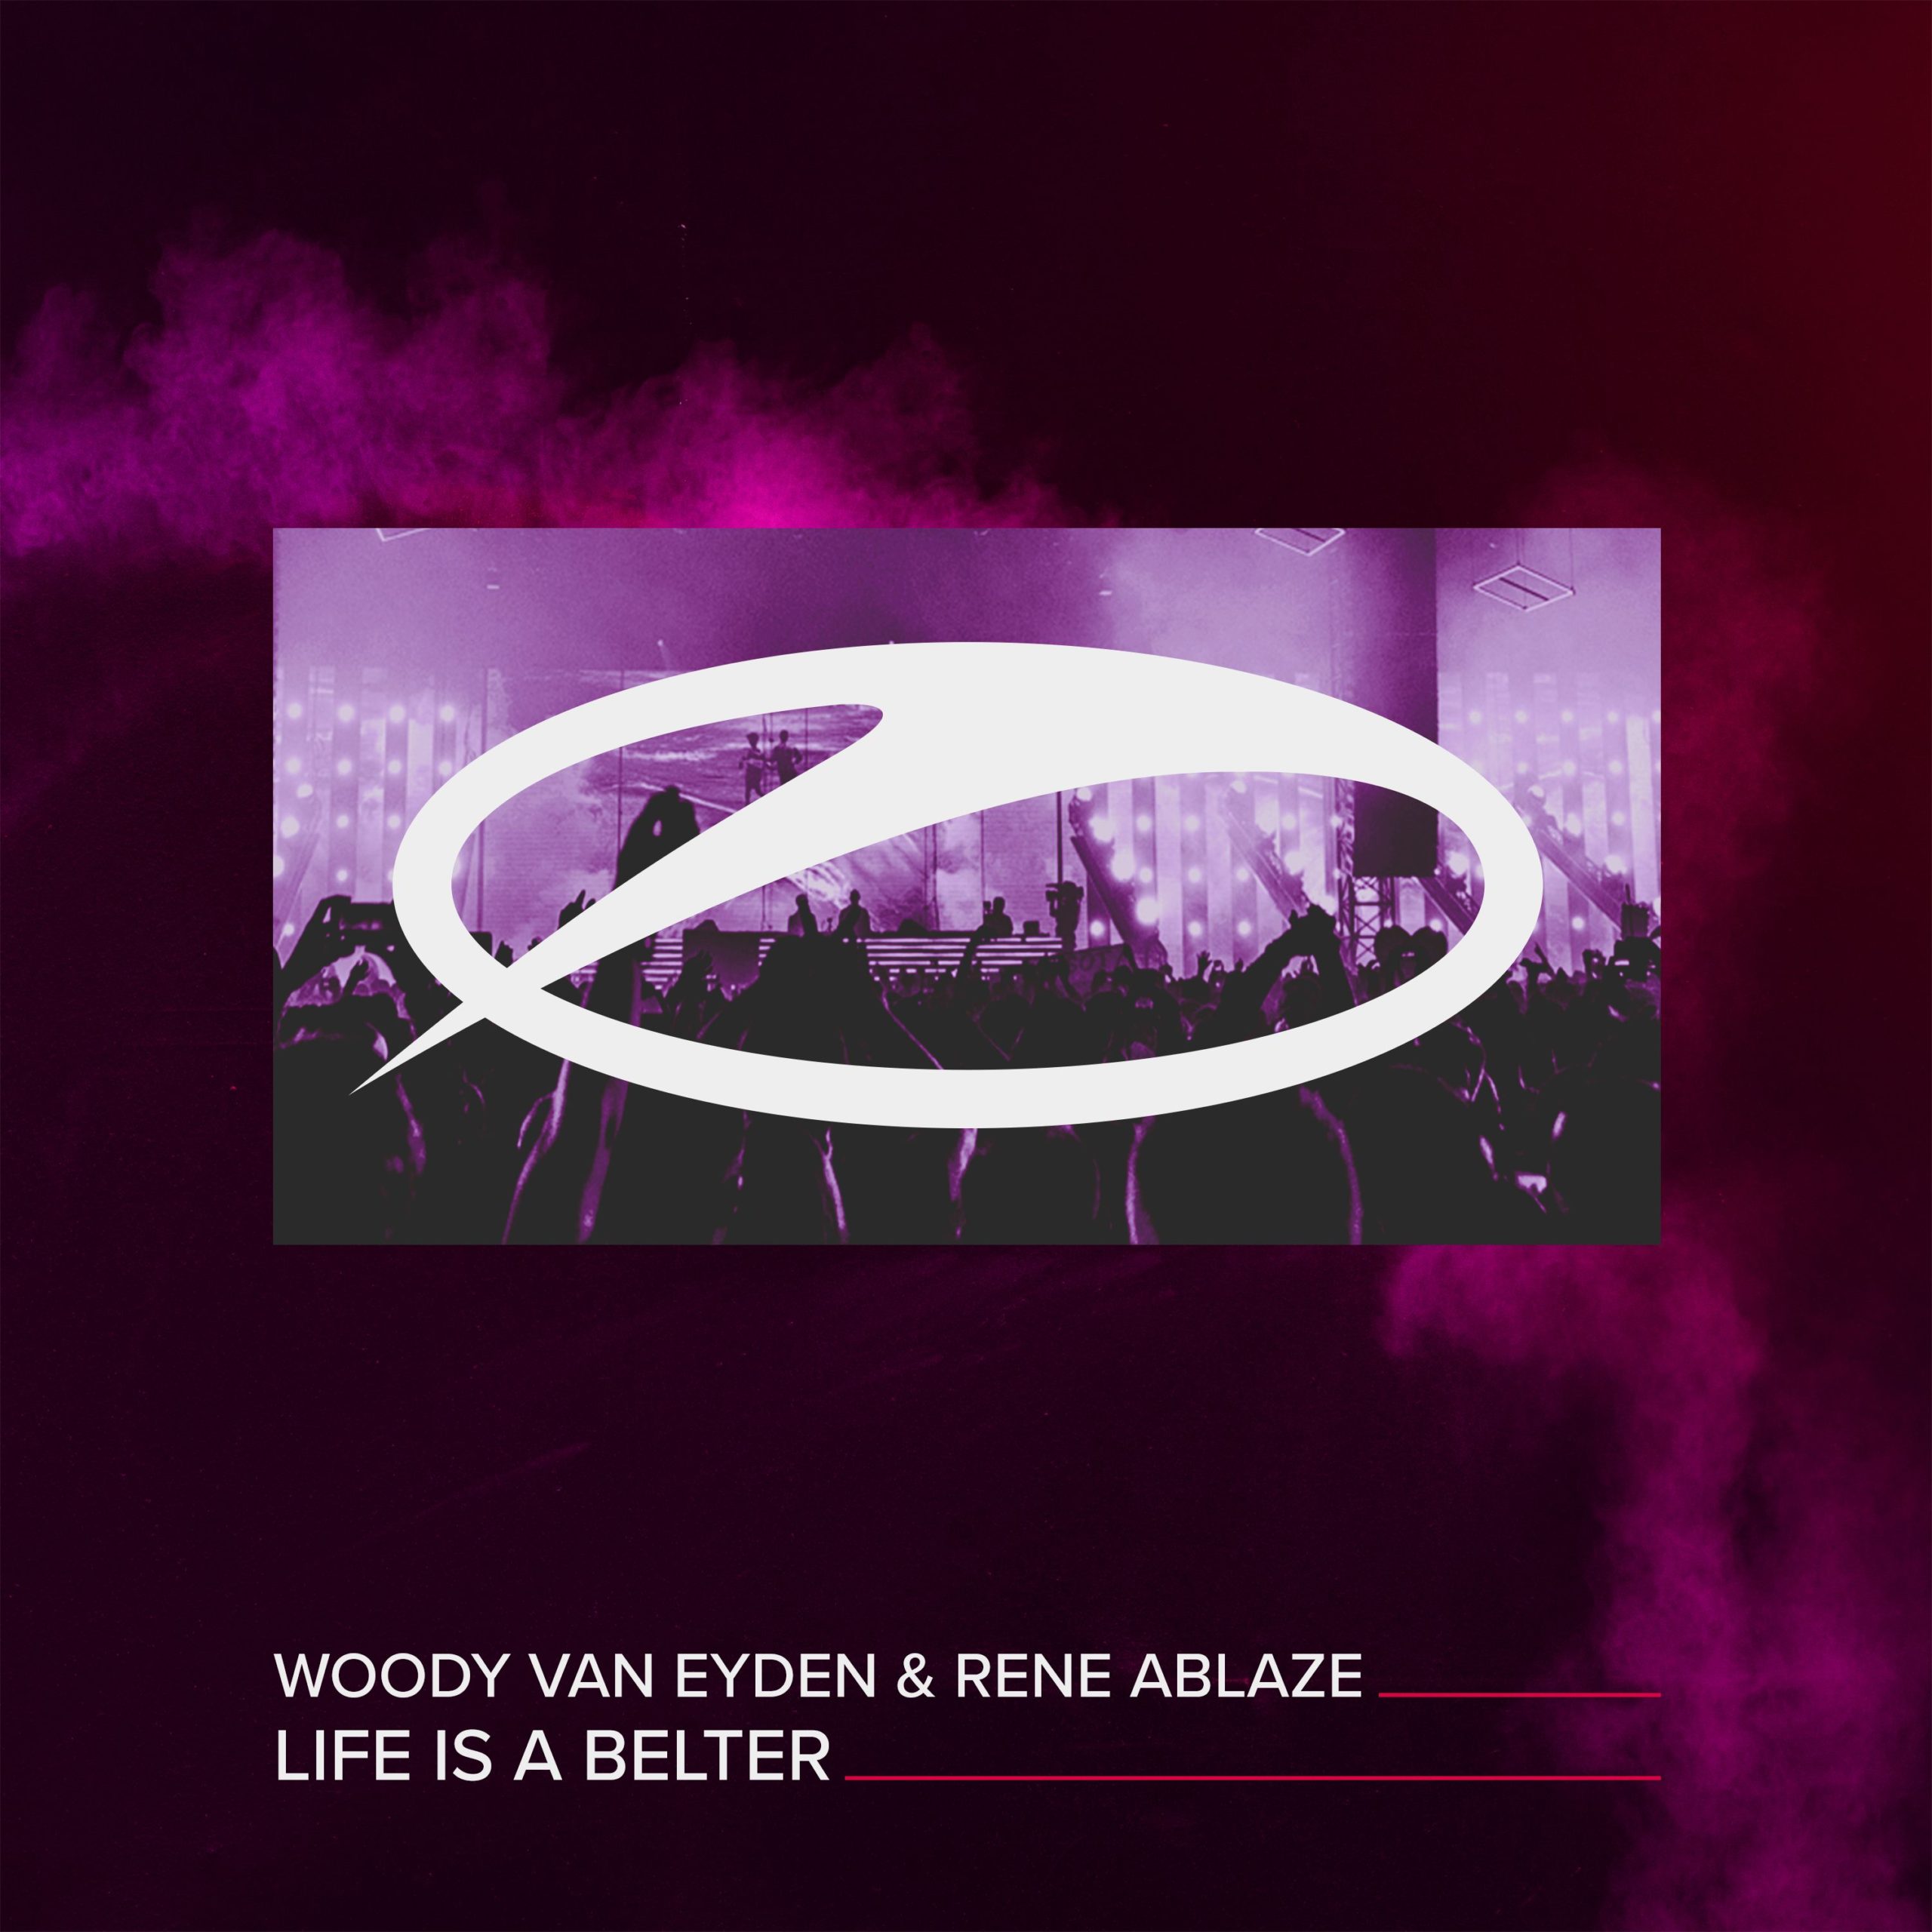 Woody van Eyden and Rene Ablaze presents Life Is A Belter on Armada Music